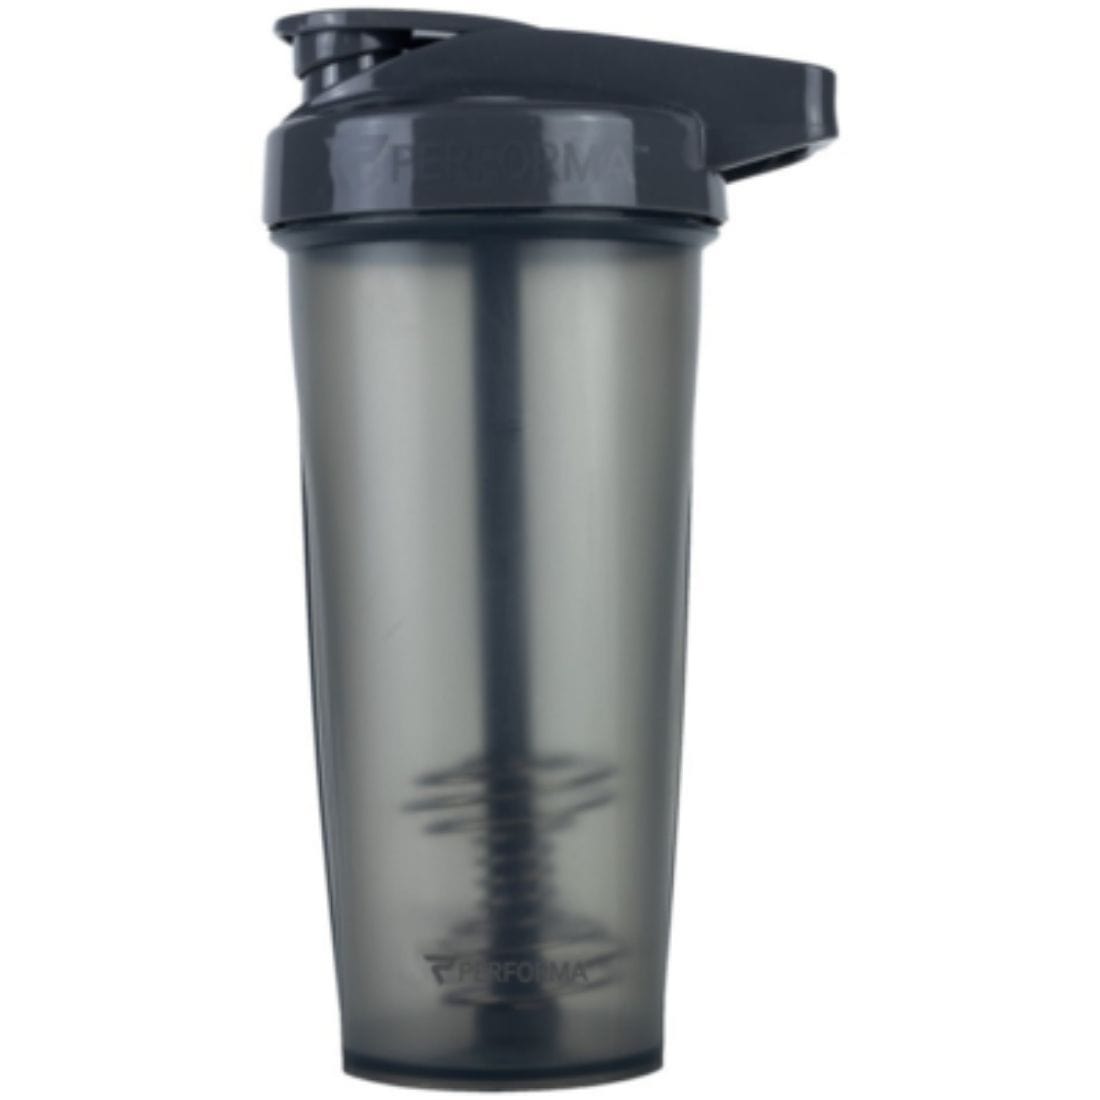 PERFORMA Activ Shaker Cup, 828ml